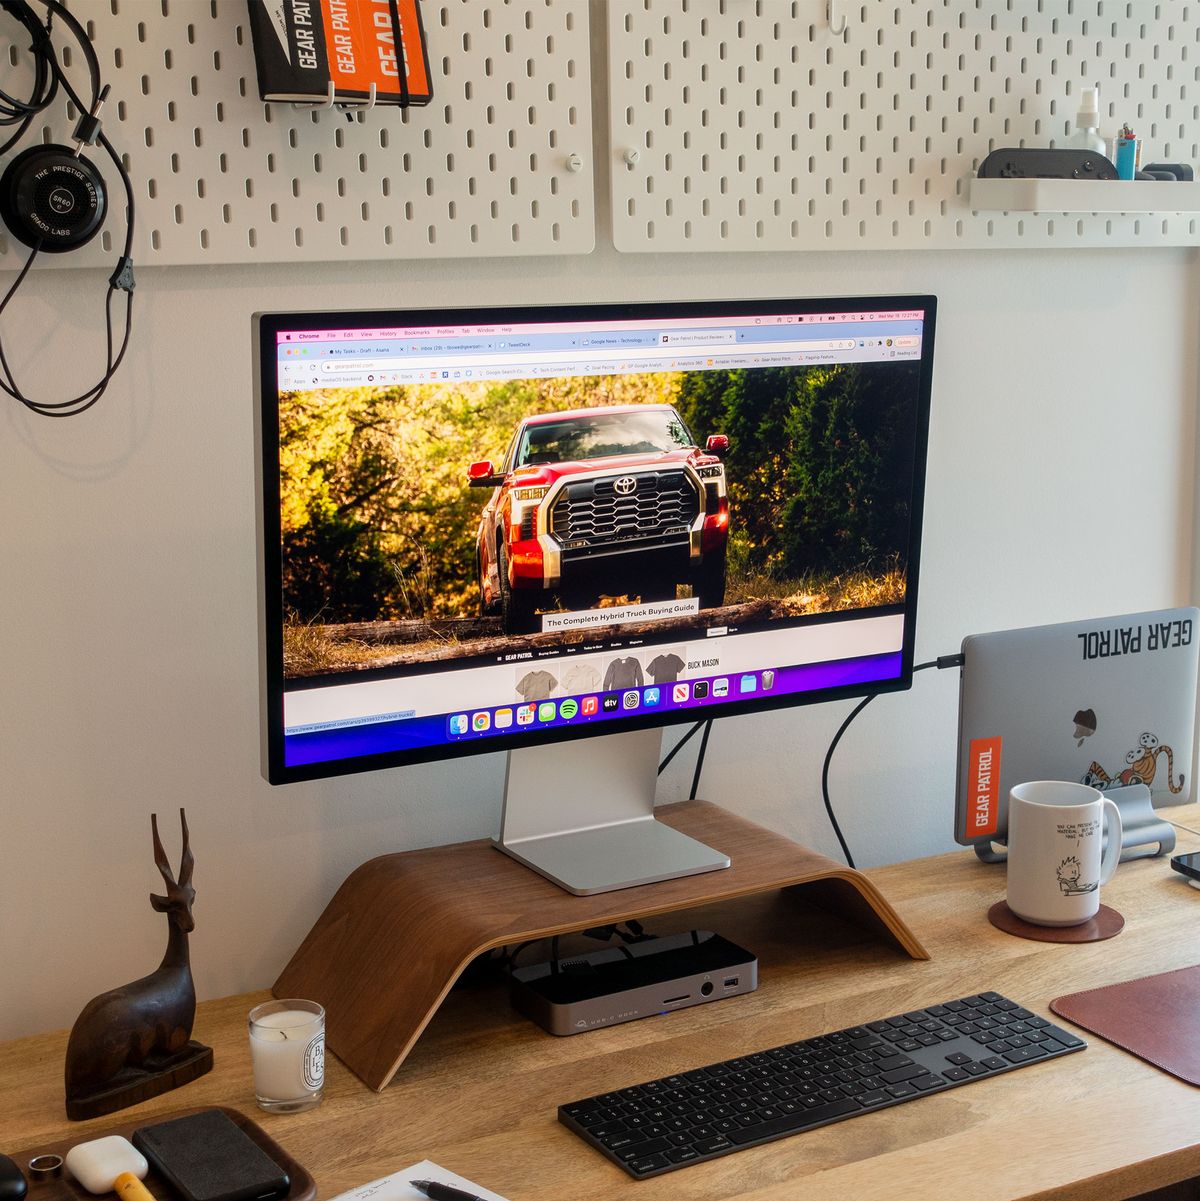 Afdeling gelijktijdig Calamiteit Apple's Studio Display Is the Perfect All-In-One Monitor for Mac Users